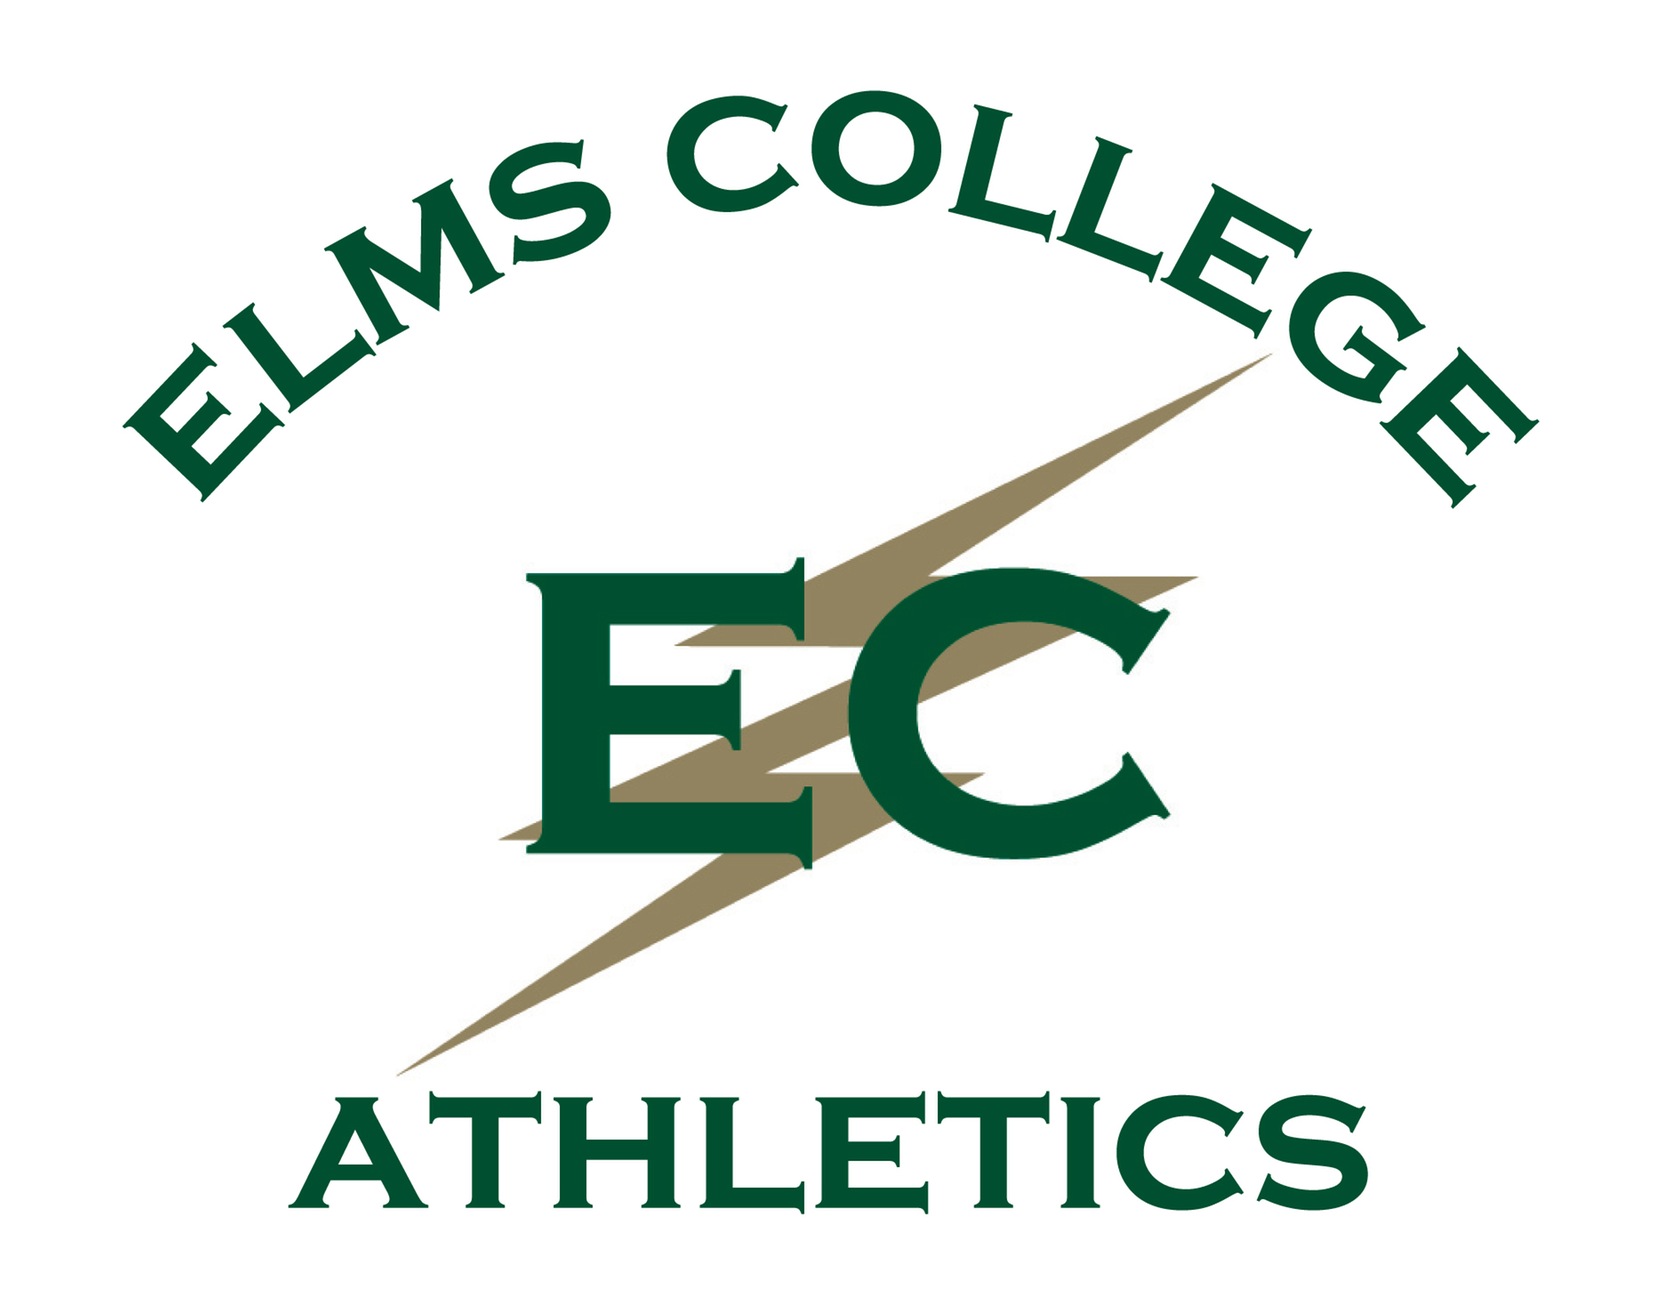 Message from the Elms Athletic Department